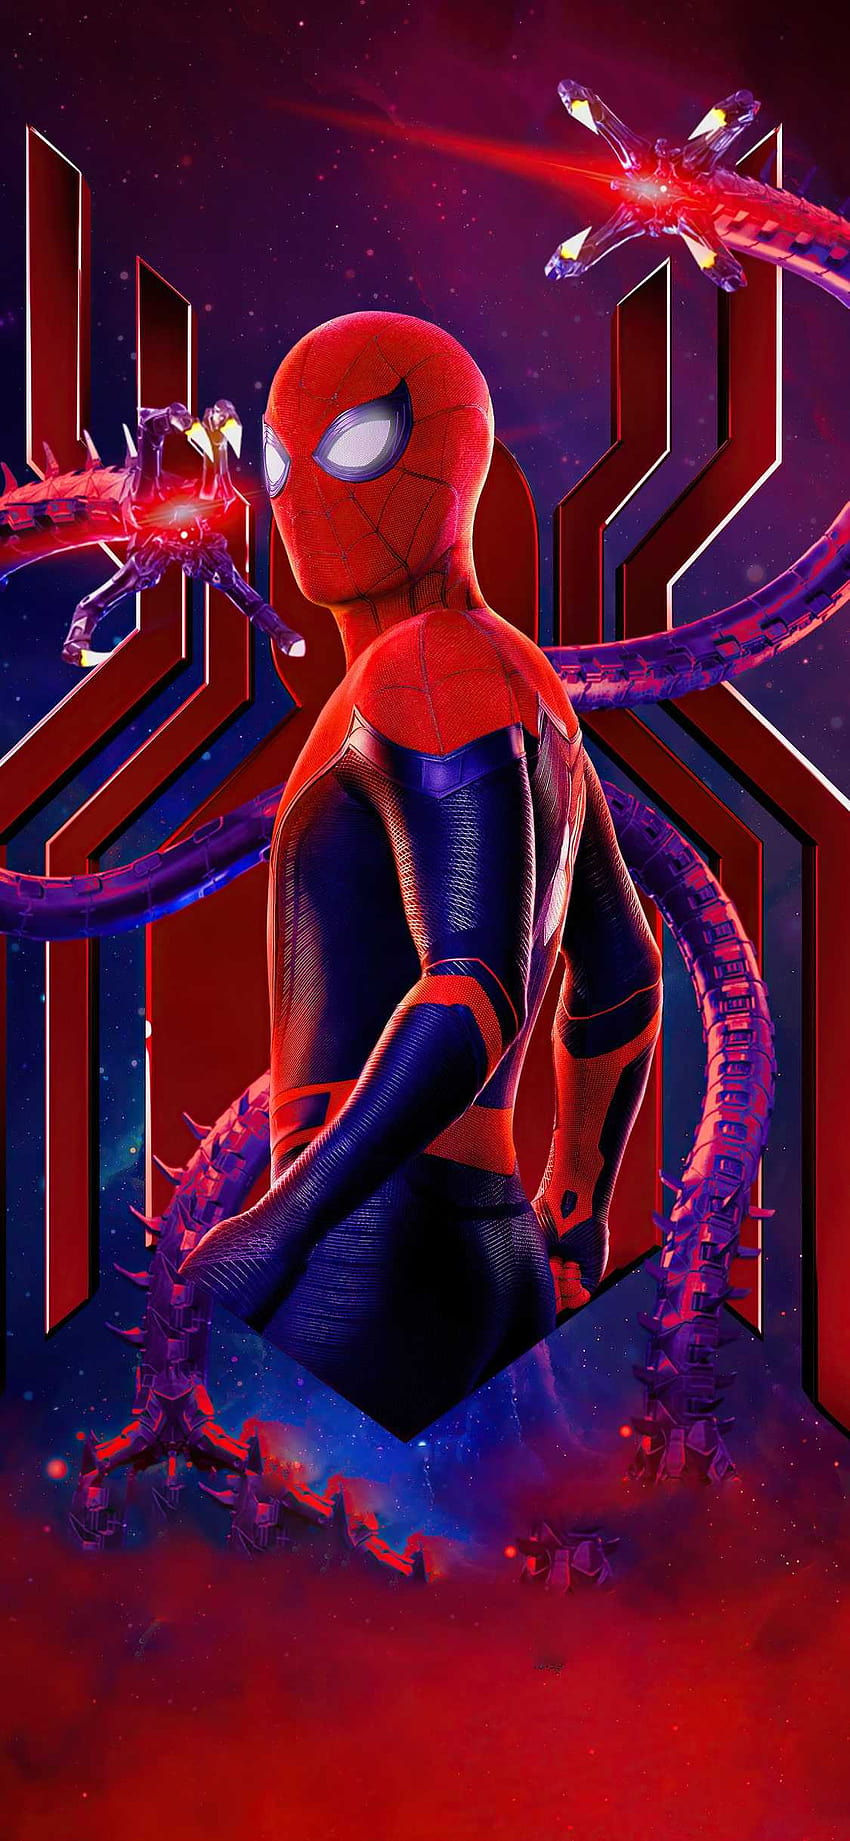 Doctor Octopus Spider-Man No Way Home Movie Wallpaper iPhone Phone 4K #3331e